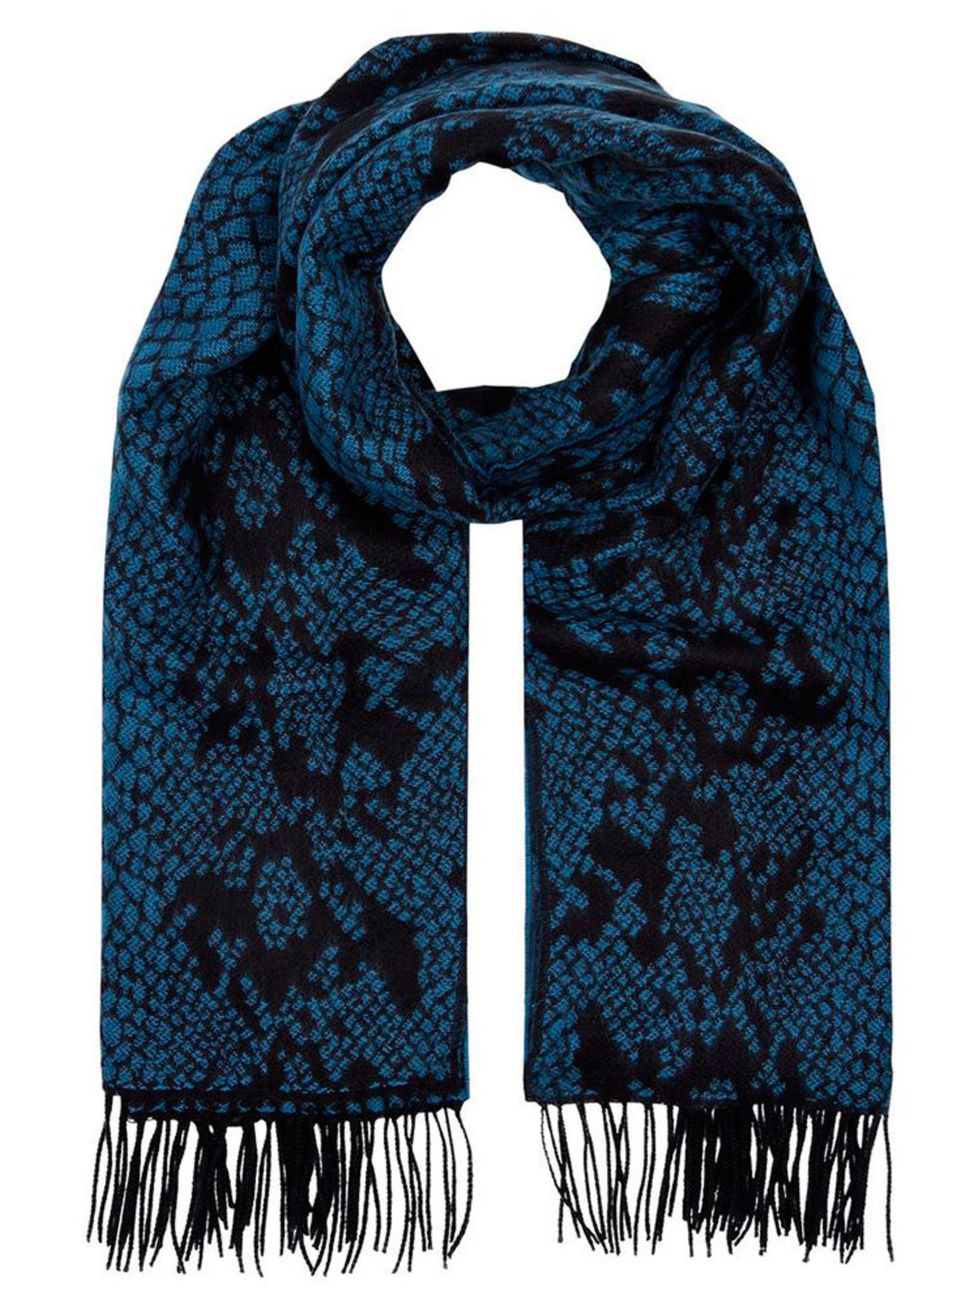 <p><a href="http://www.hobbs.co.uk/product/display?productID=0214-1709-104600&refpage=search/results" target="_blank">Hobbs </a>Scarf, £49<br />
 </p>